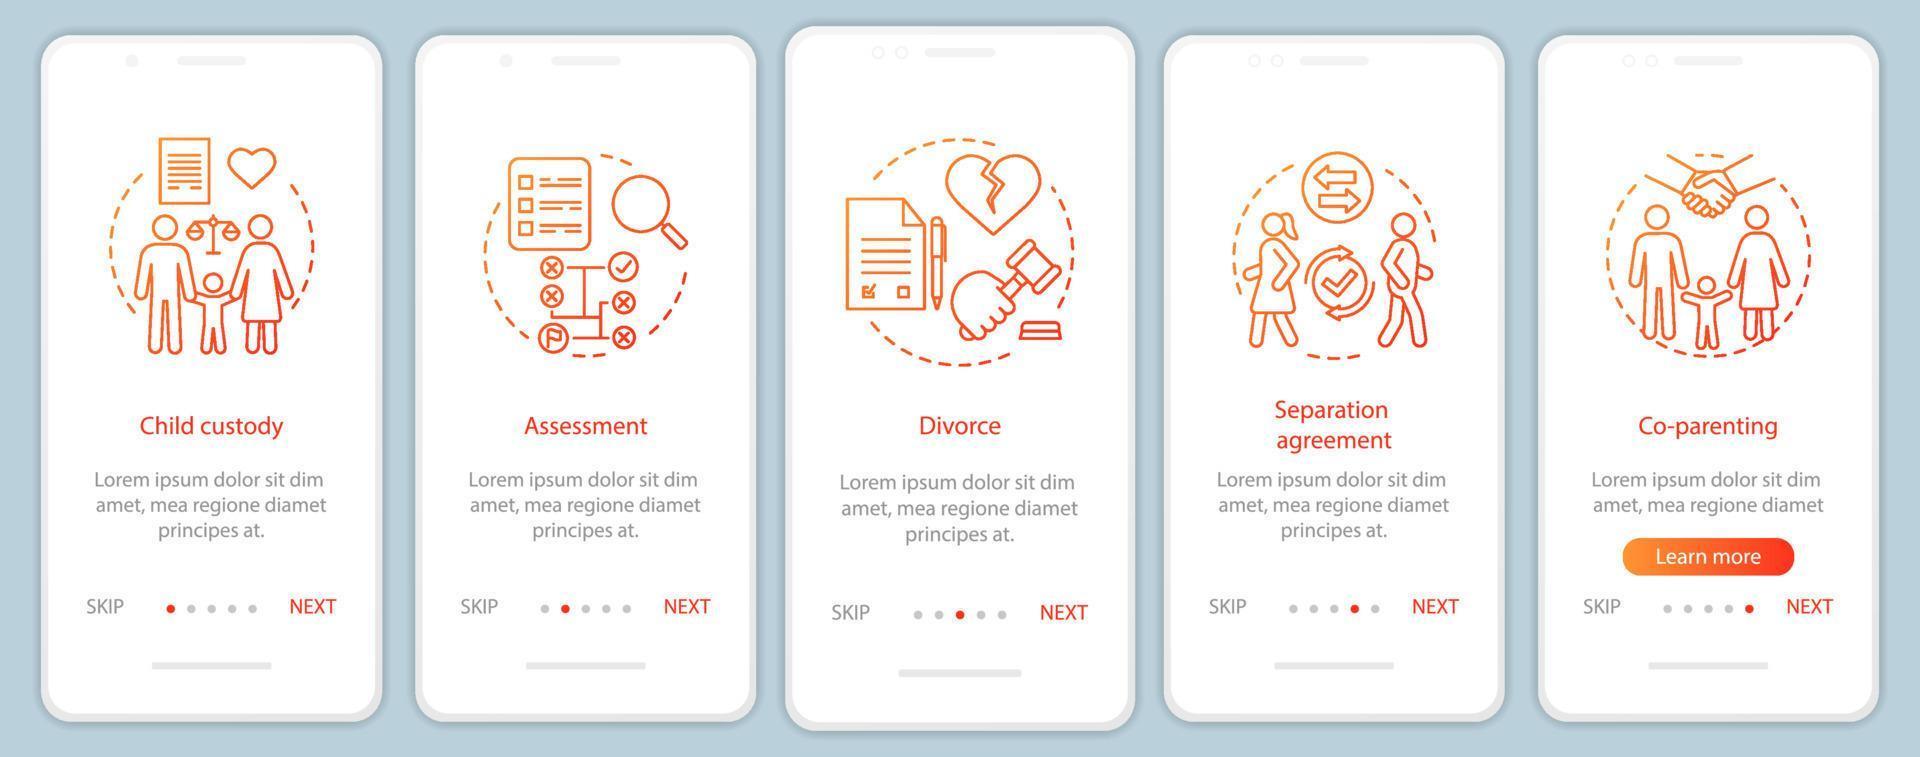 Mediation onboarding mobile app page screen with linear concept. Child custody, assessment, divorce, co-parenting walkthrough steps graphic instructions. UX, UI, GUI vector template with illustrations